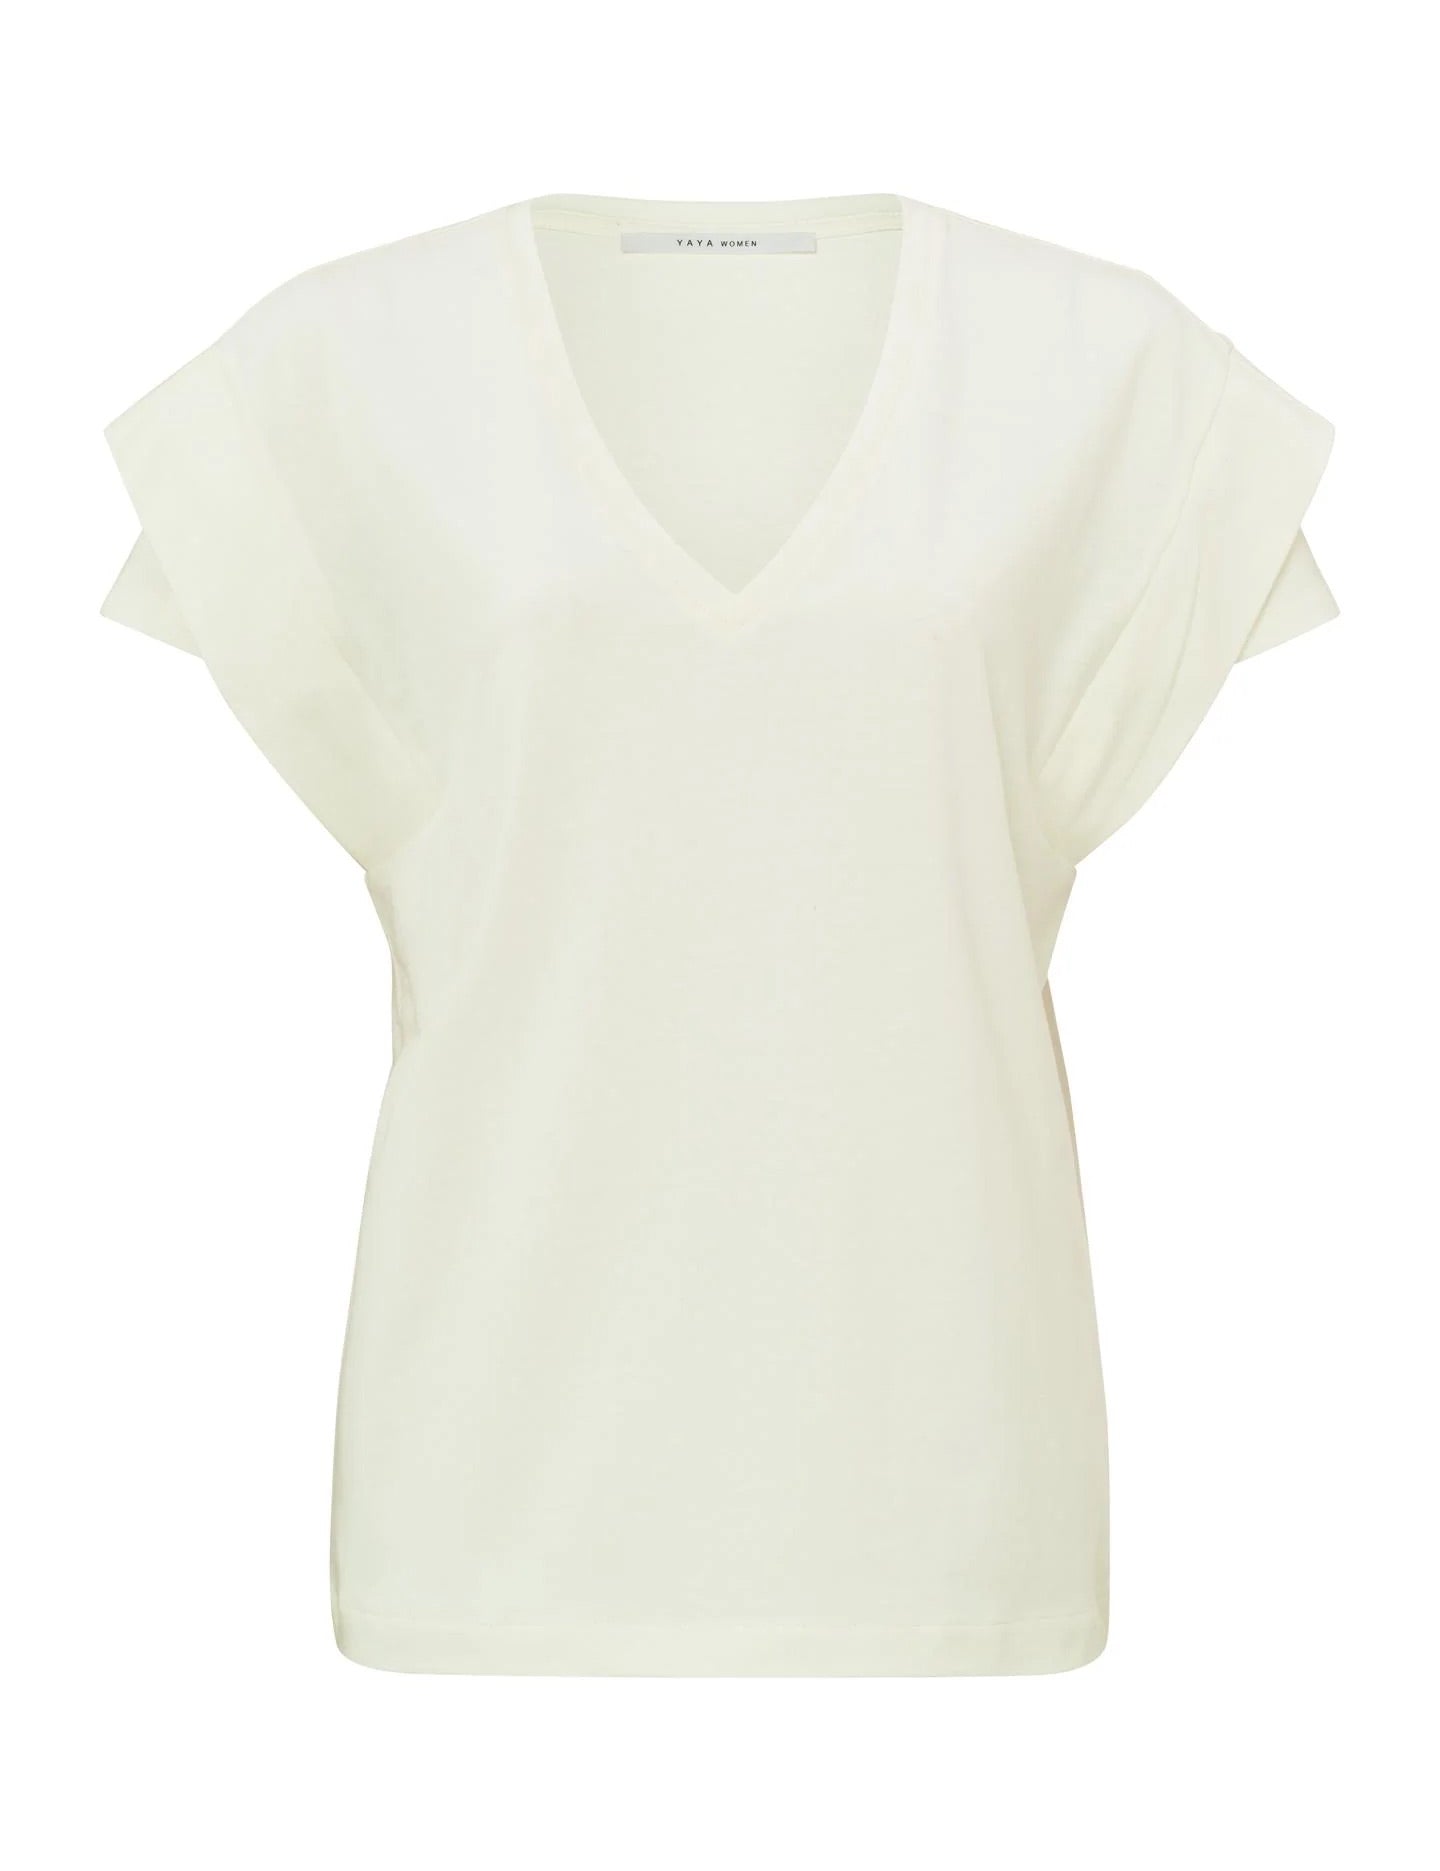 top-with-v-neck-and-double-short-sleeves-in-regular-fit-ivory-white_ddf0f220-f0b1-4e25-acc3-92488e1ed89b_2880x_jpg.jpg